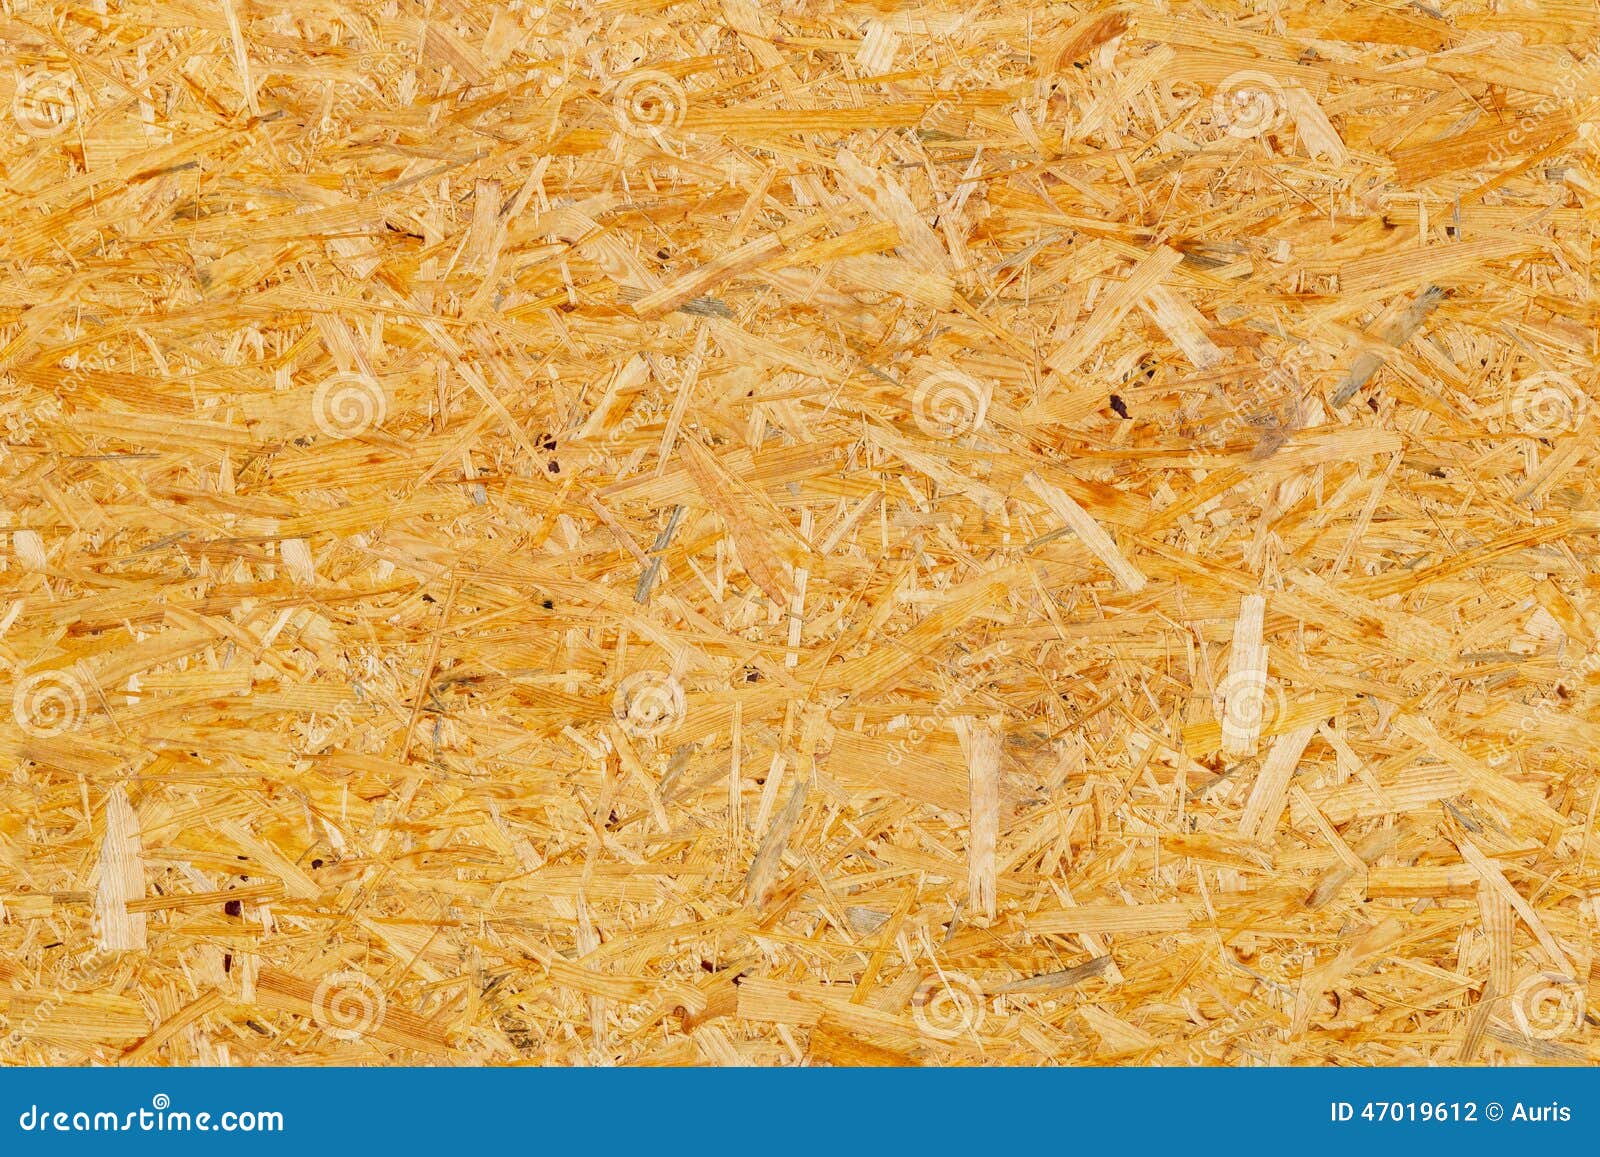 seamless texture of oriented strand board, osb